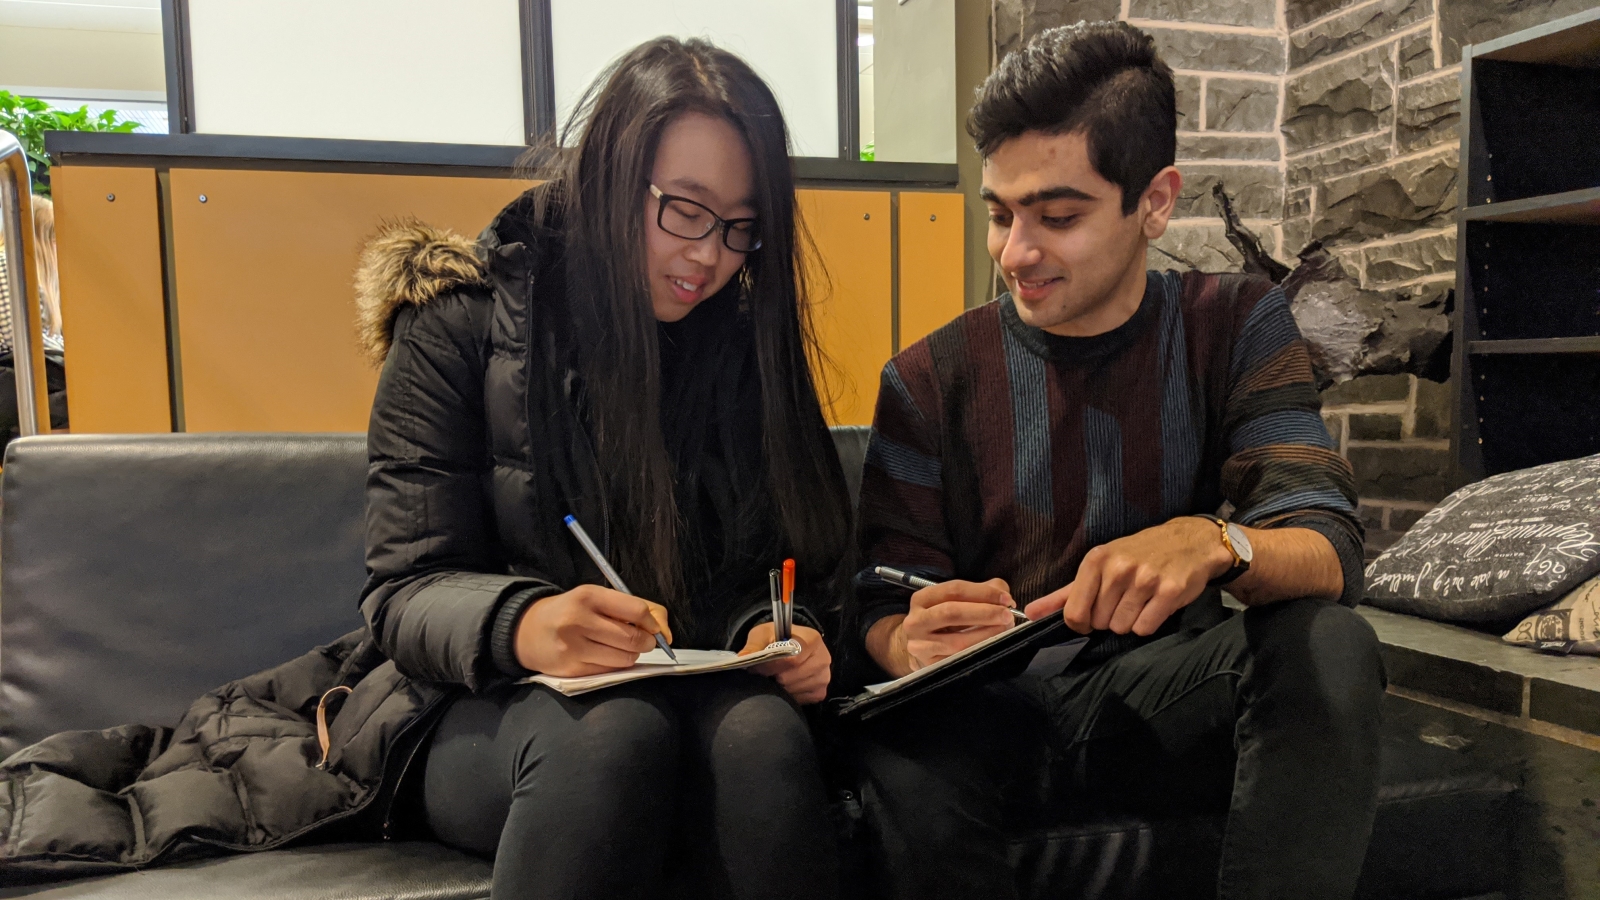  Kate He (left) and Faris Kapra are preparing to compete at the World University Debate Championships in Thailand later this month.